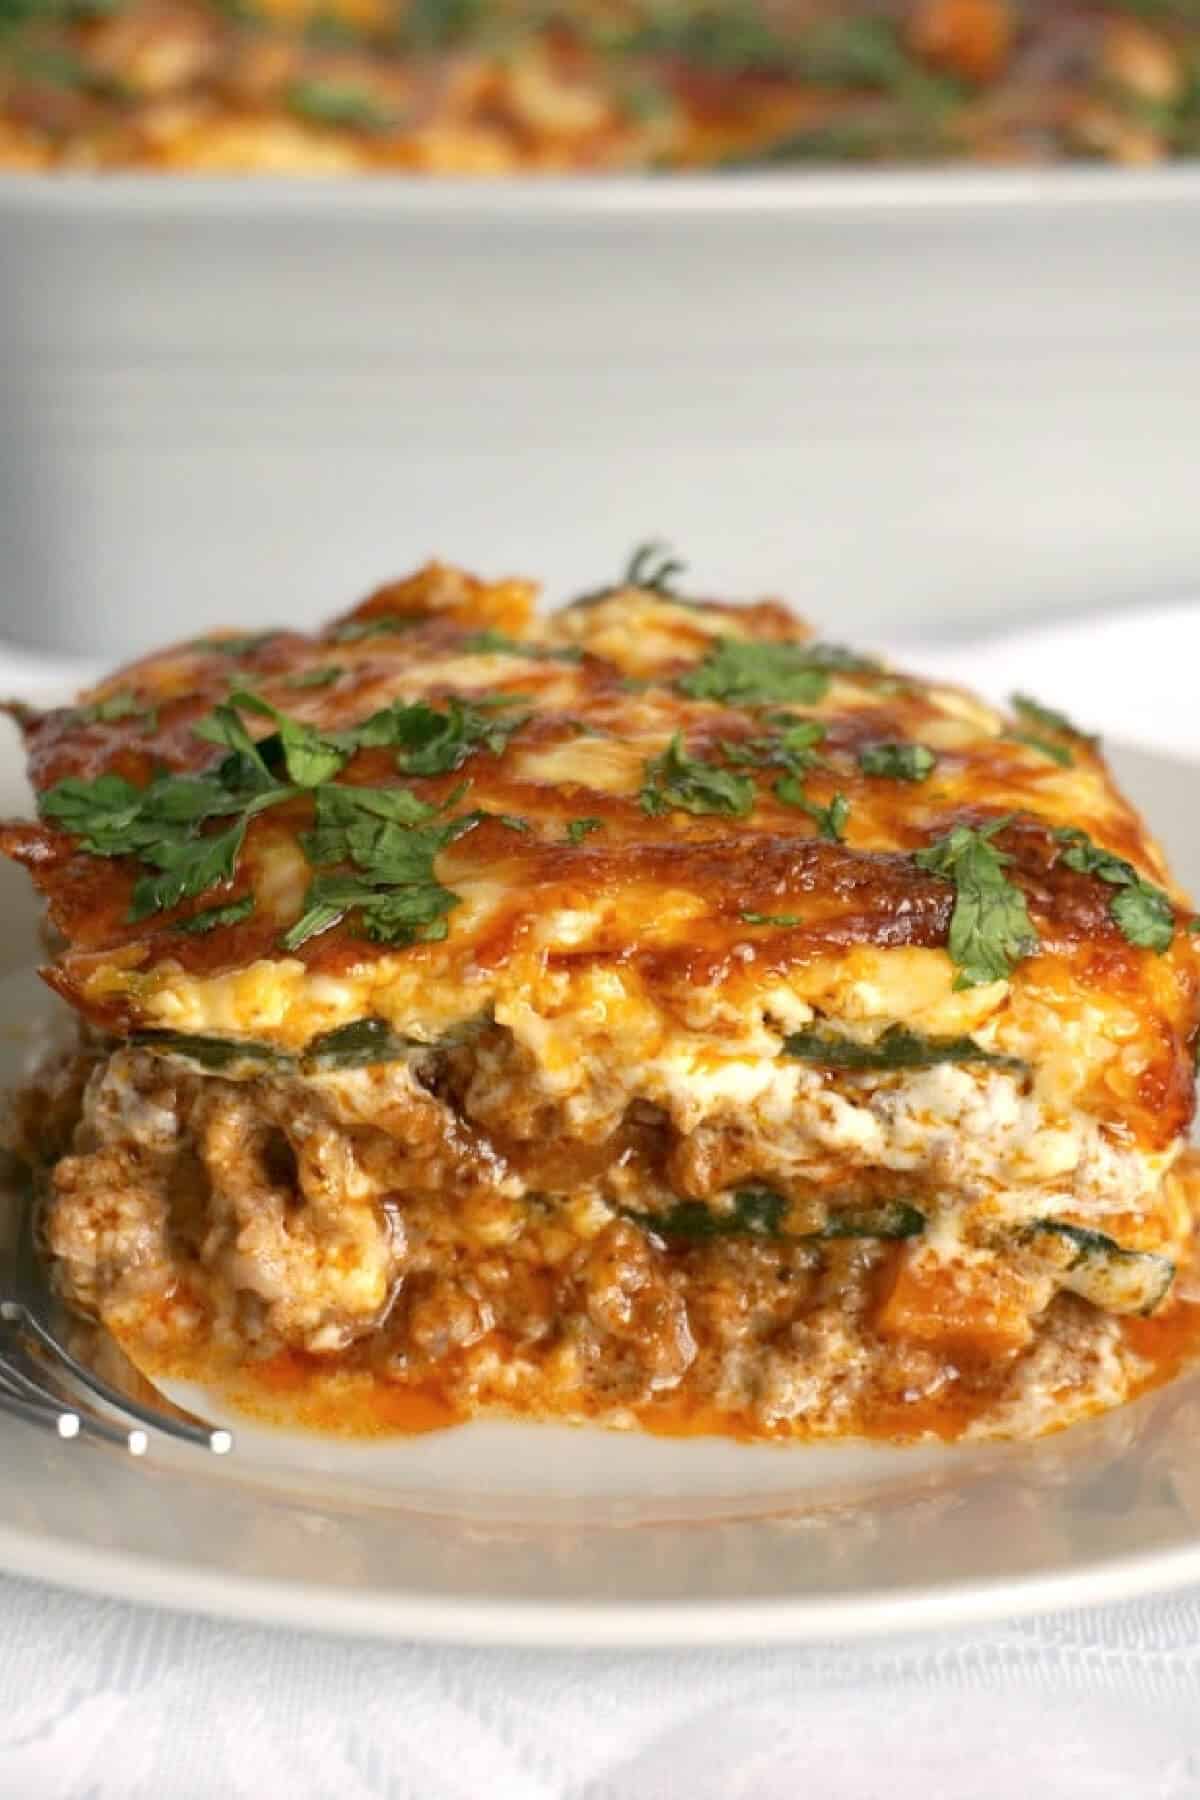 A slice of lasagna on a white plate.